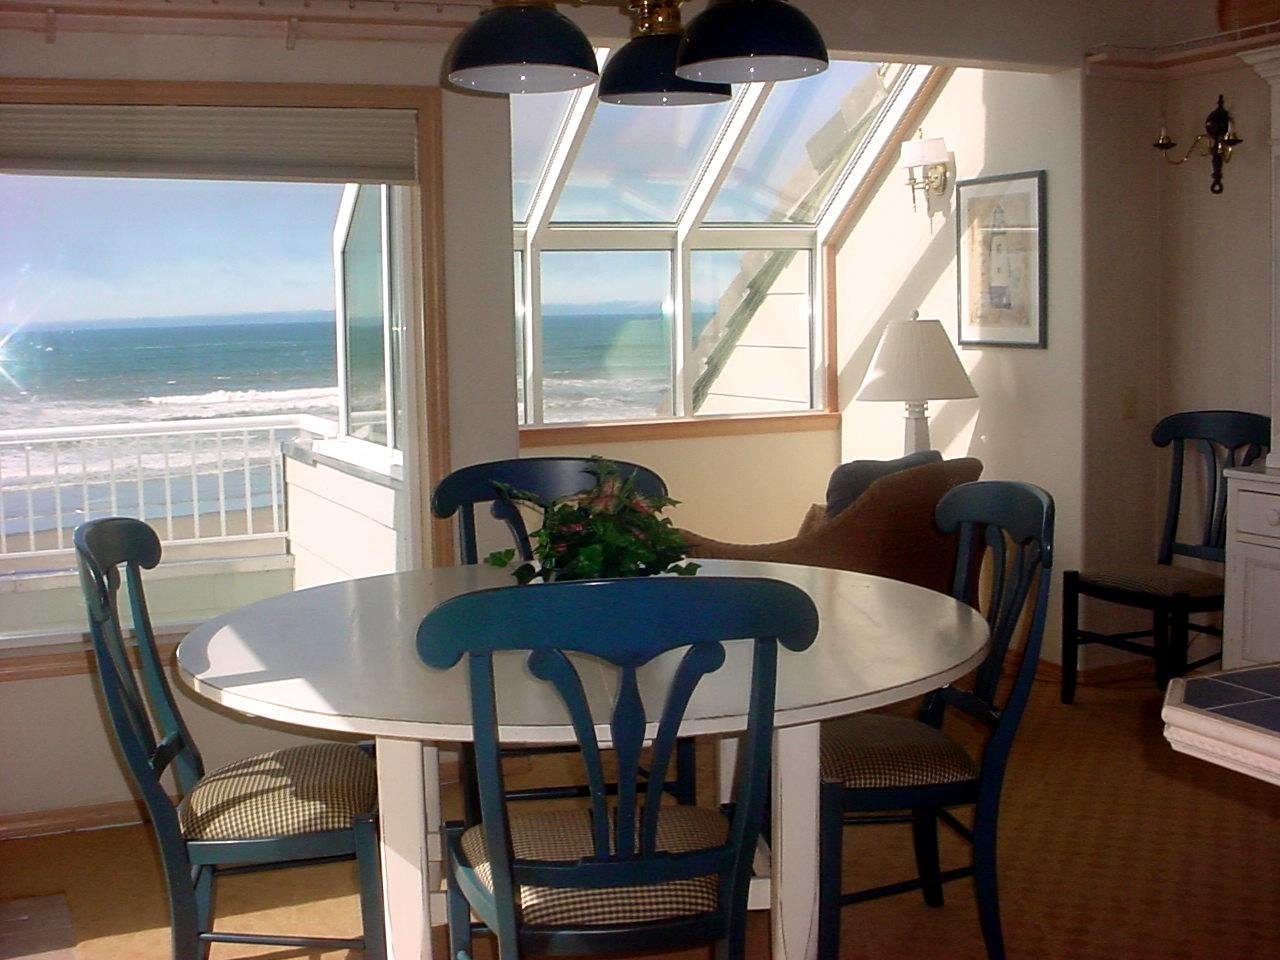 Penthouse Dining Room at Point Brown Resort